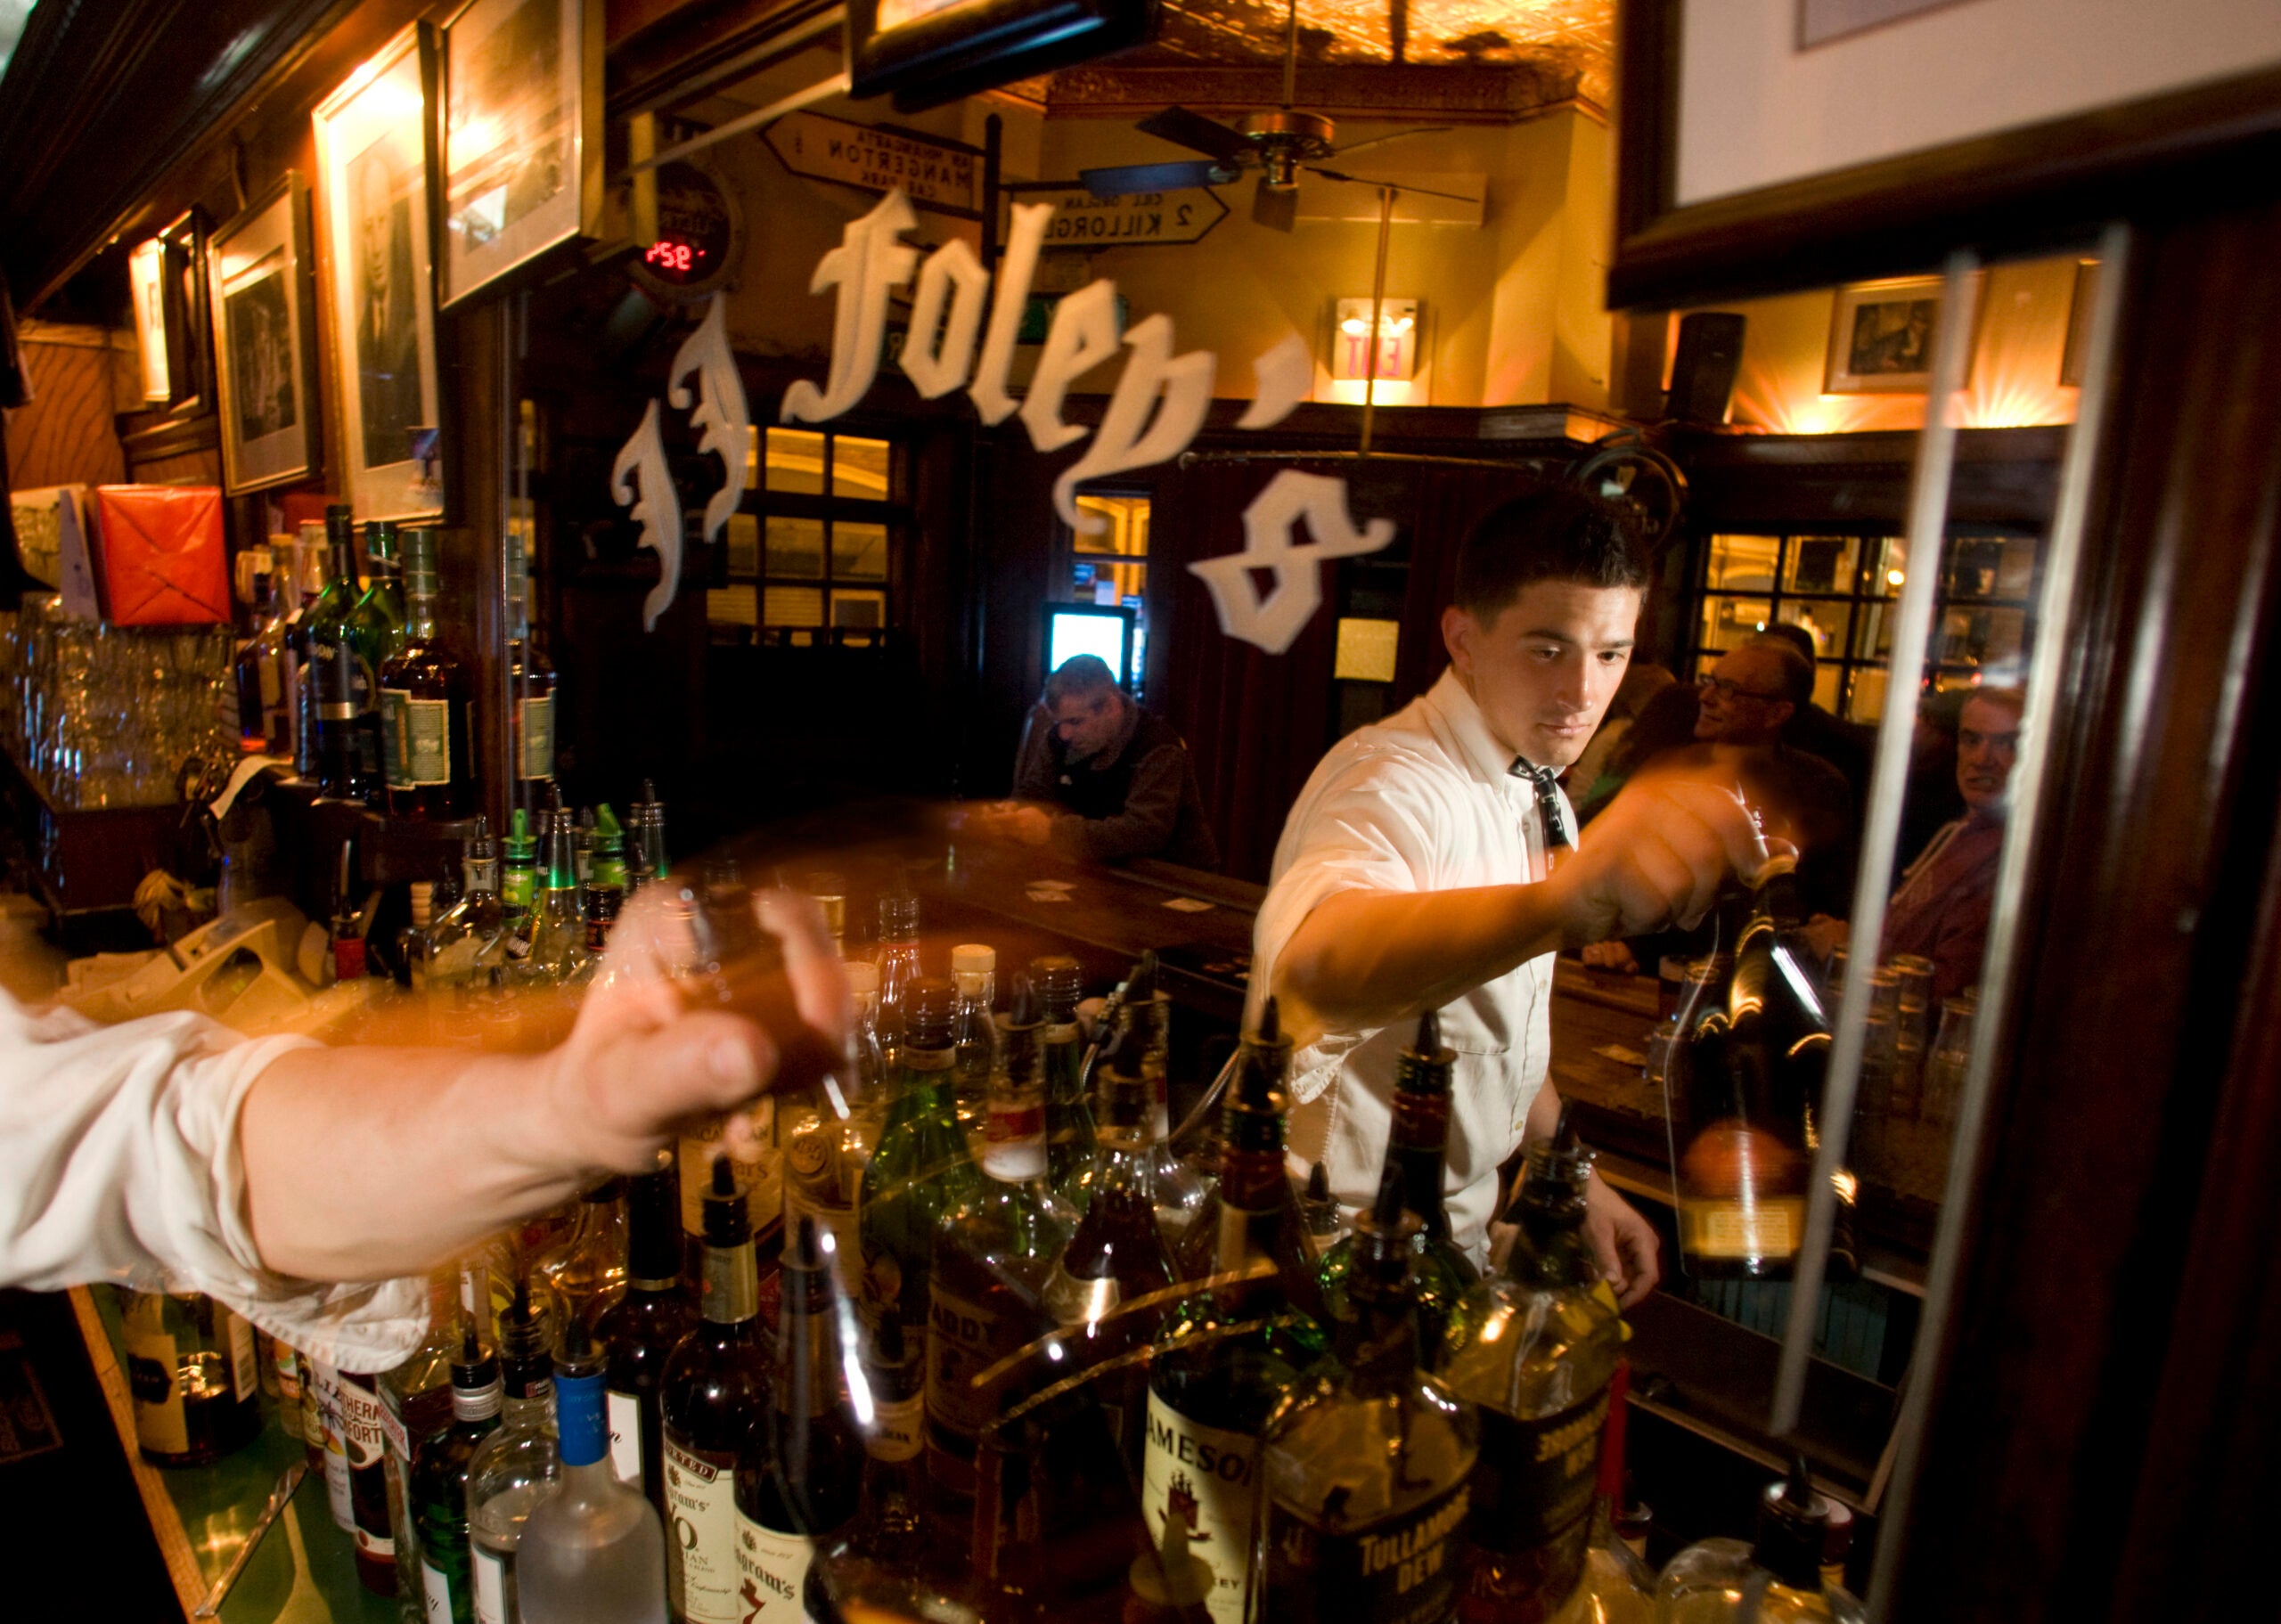 J.J. Foley's in Boston was founded in 1909.